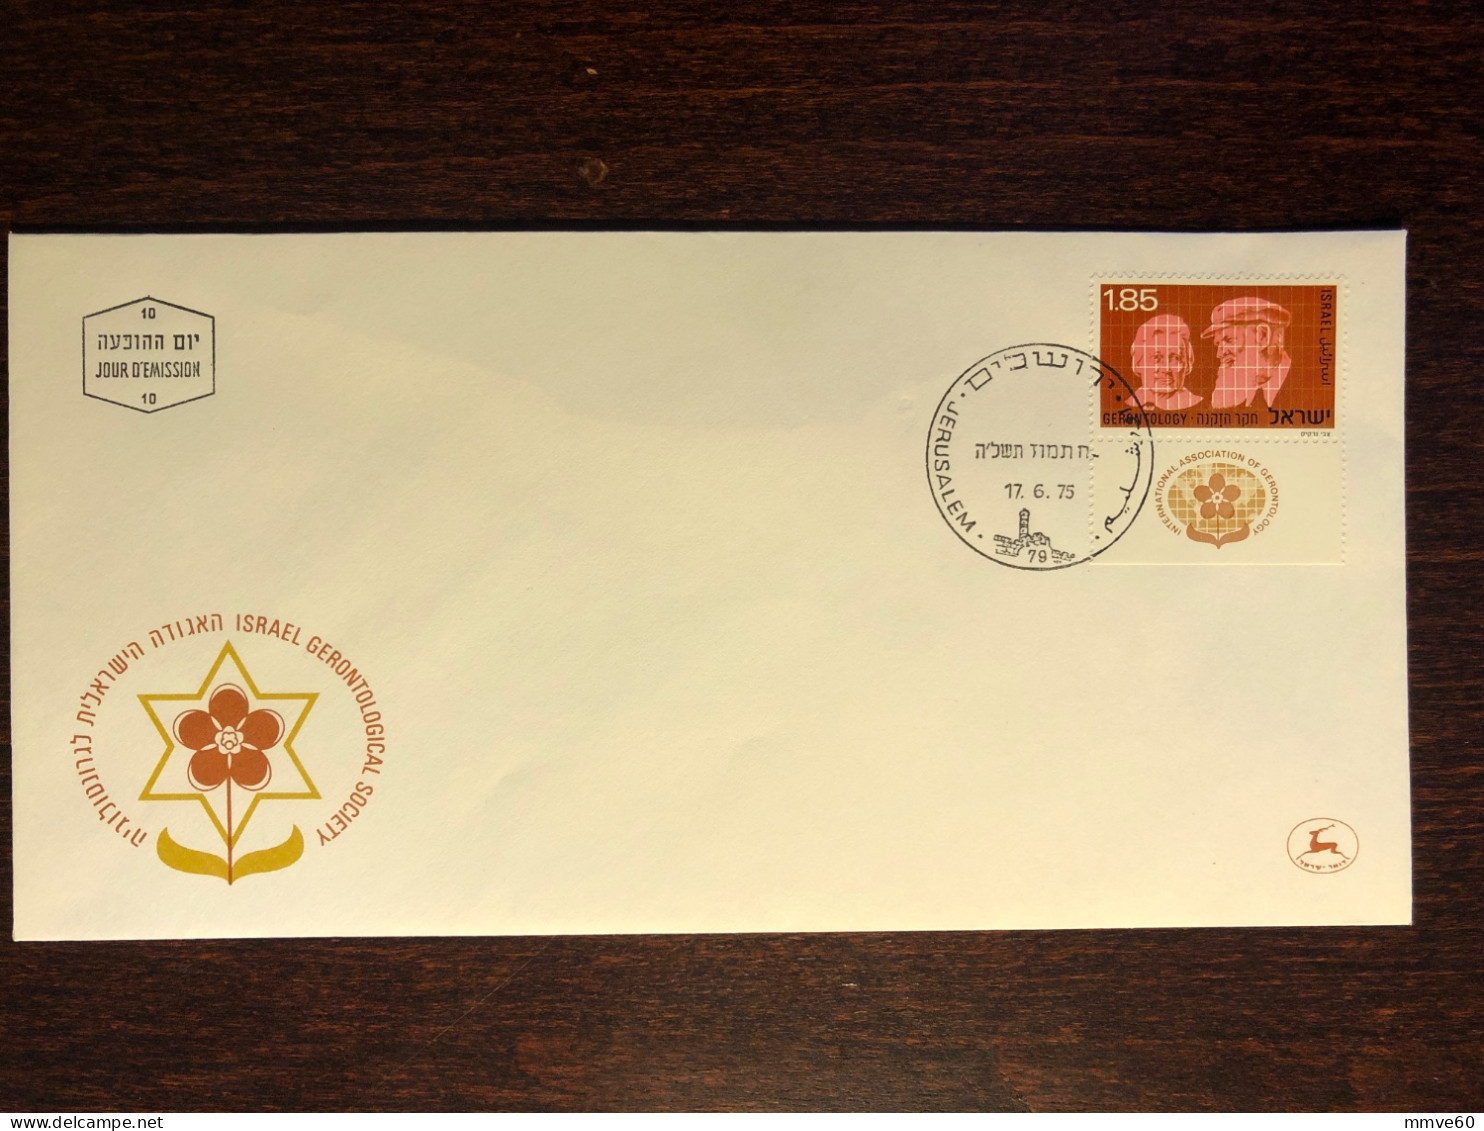 ISRAEL FDC COVER 1975 YEAR GERONTOLOGY HEALTH MEDICINE STAMPS - Covers & Documents